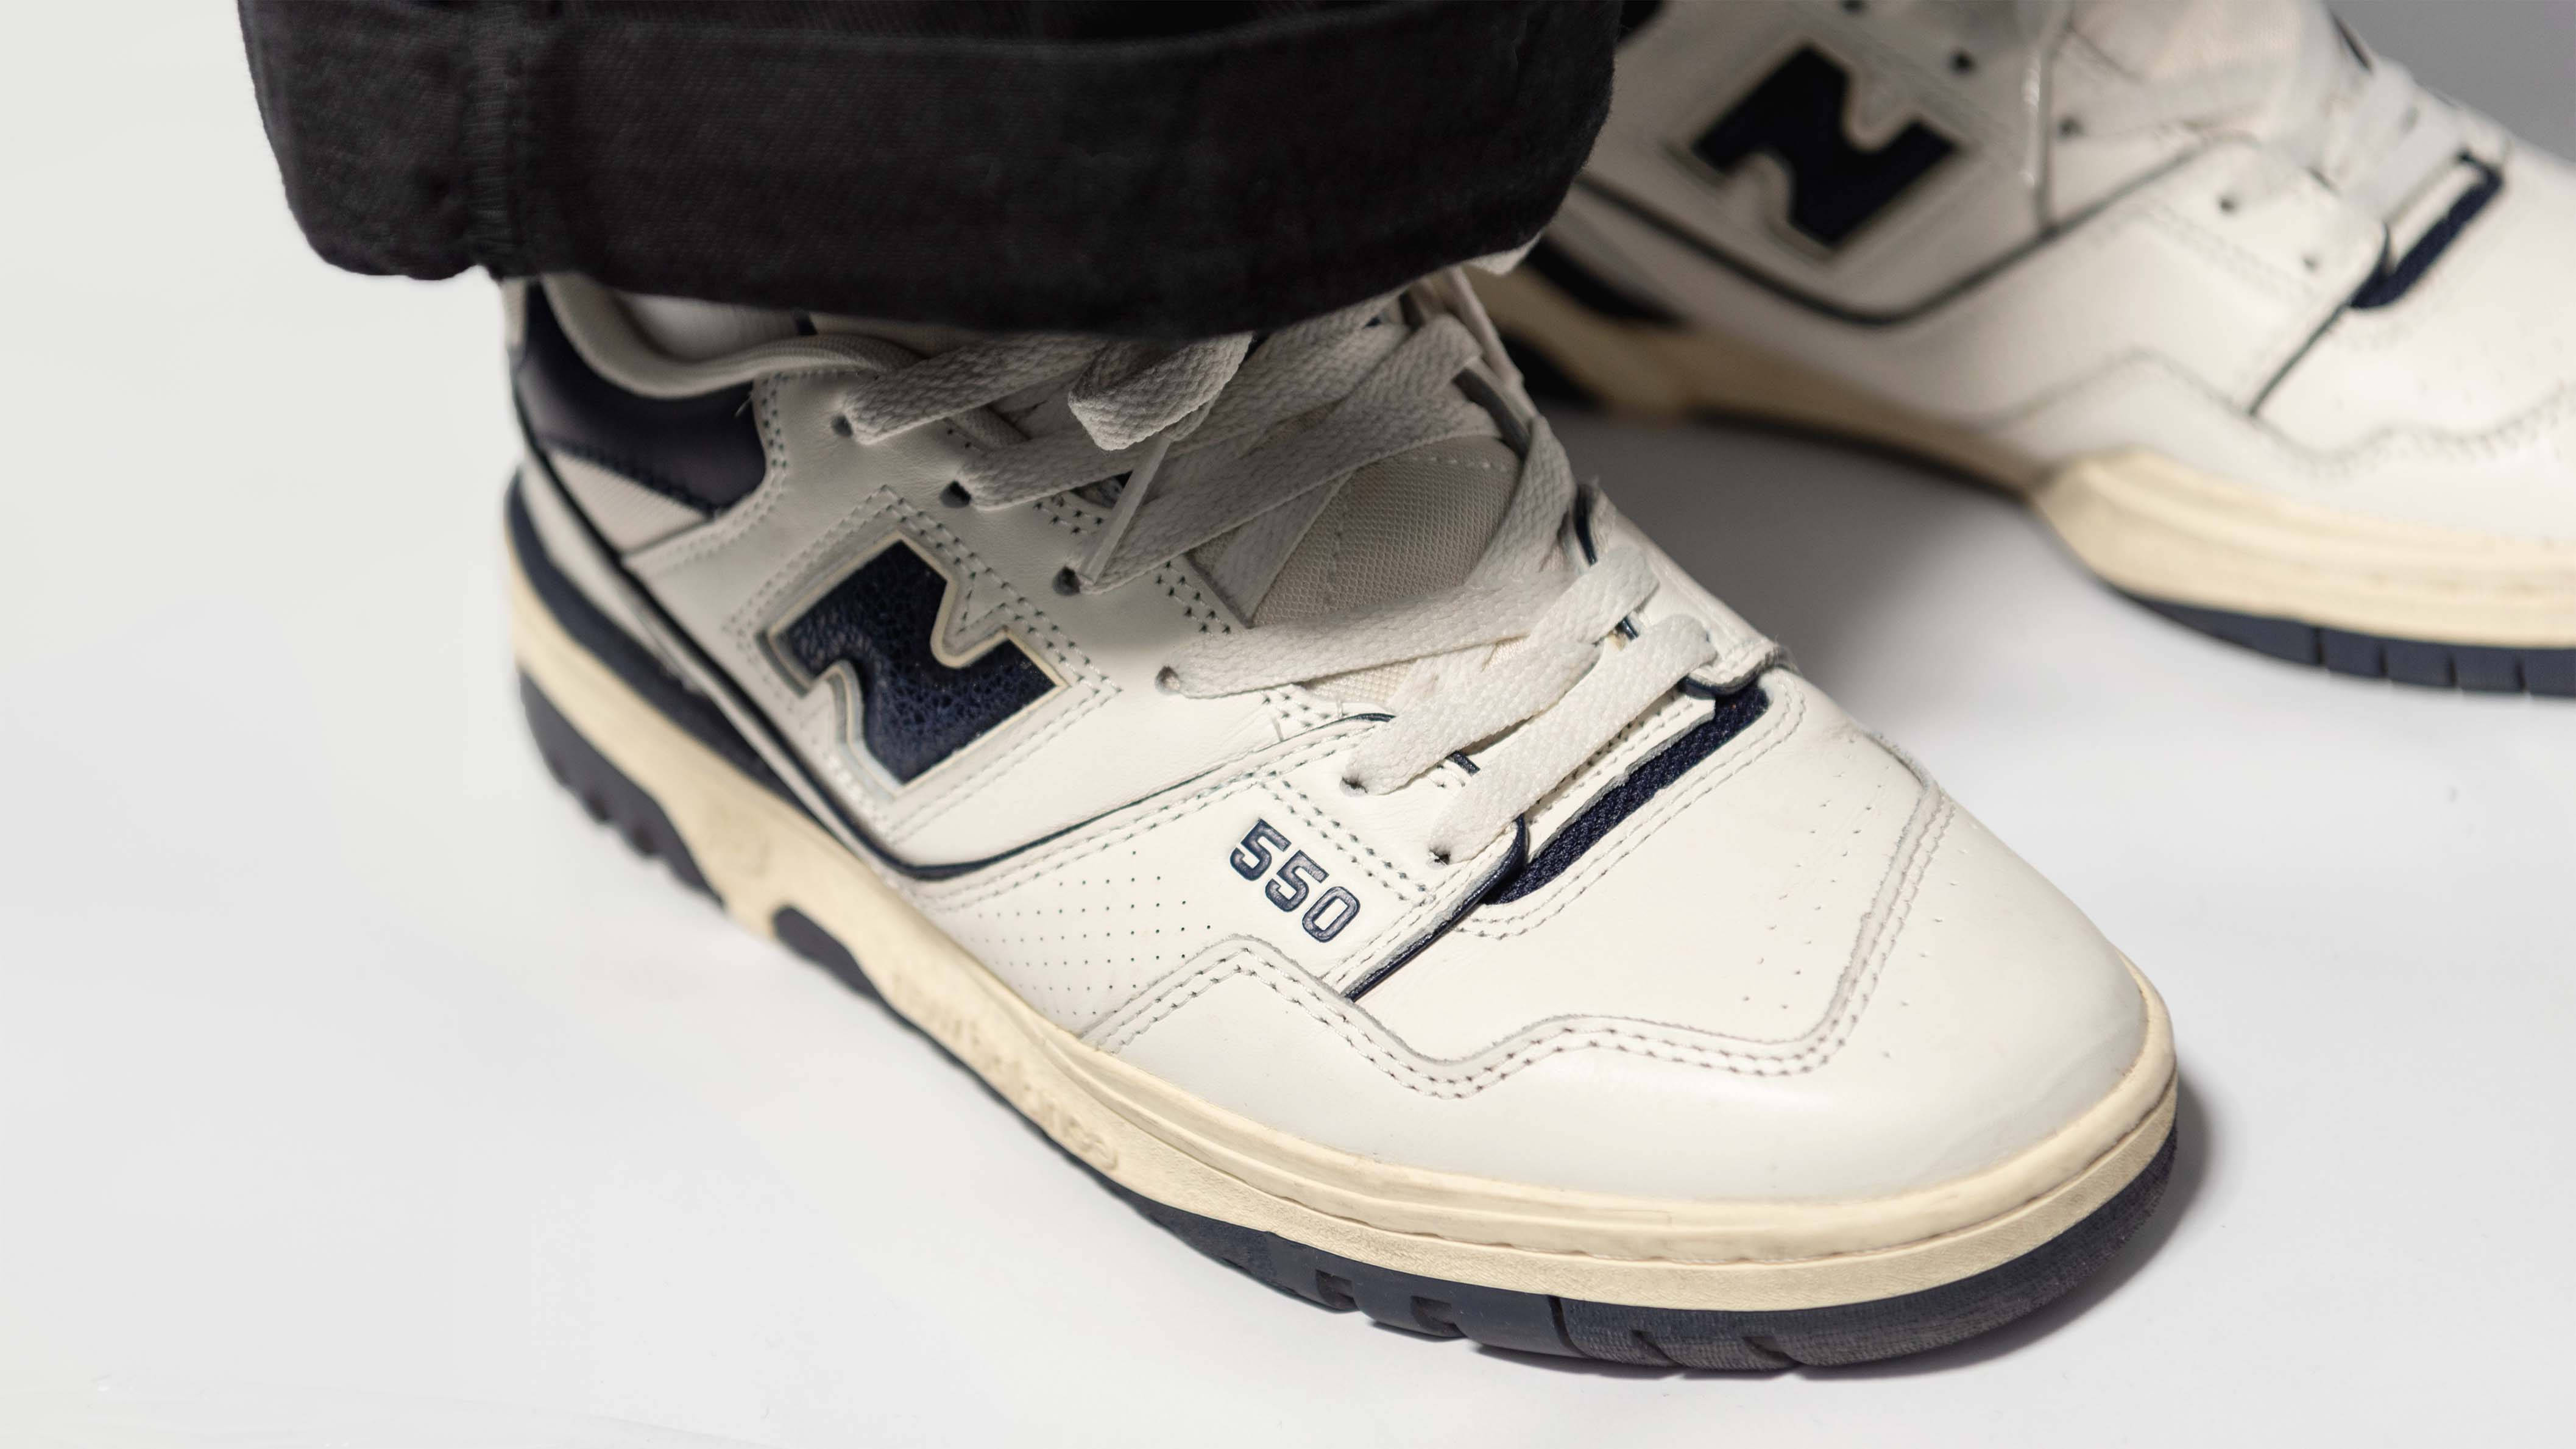 Edición Sombra Cambiable New Balance 550 Sizing: How Do They Fit? | The Sole Supplier